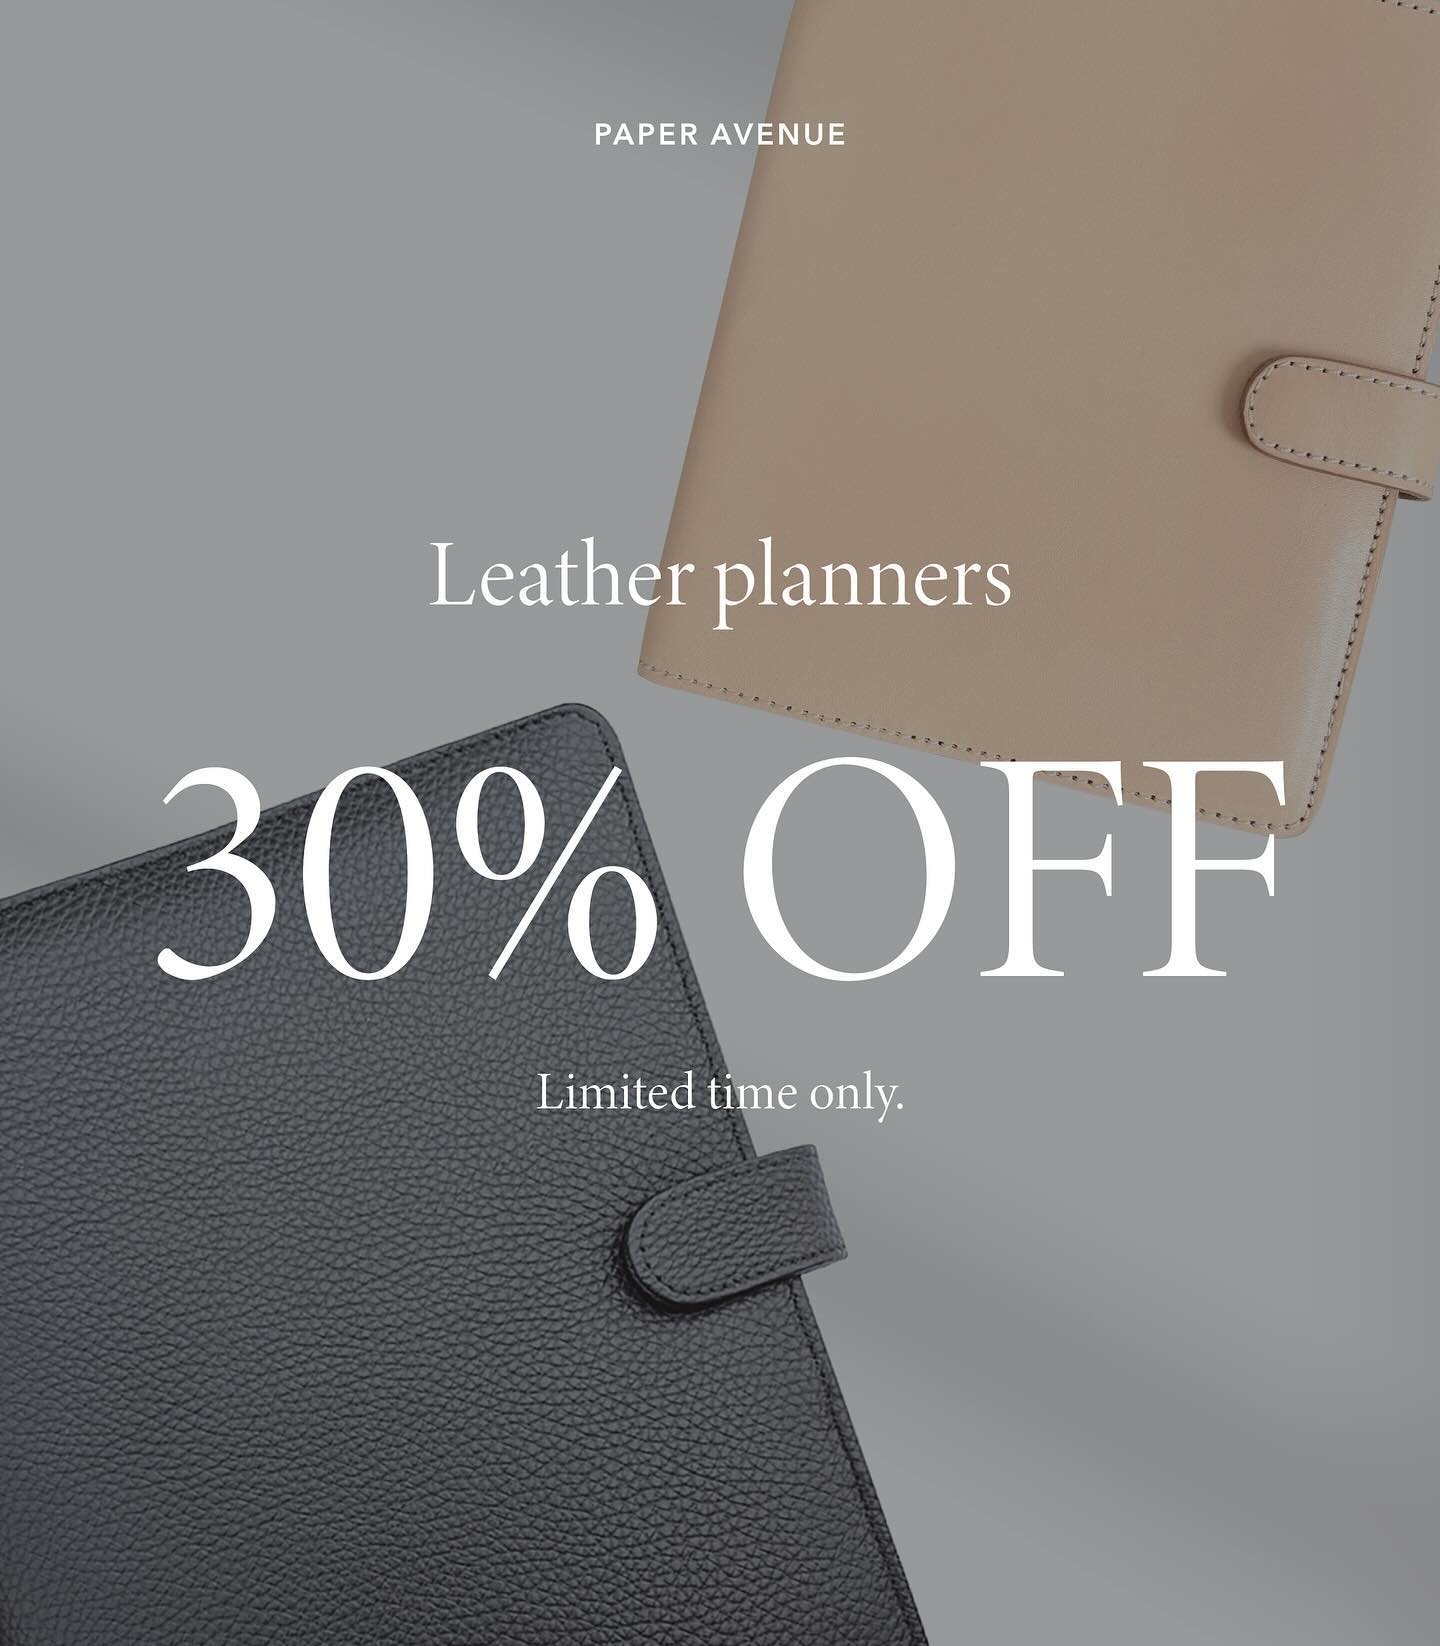 Enjoy 30% off all leather planners for a limited time only.

#leatherplanner #leatherplannercover #leatherplanners #leatheragenda #leathercover #plannershop